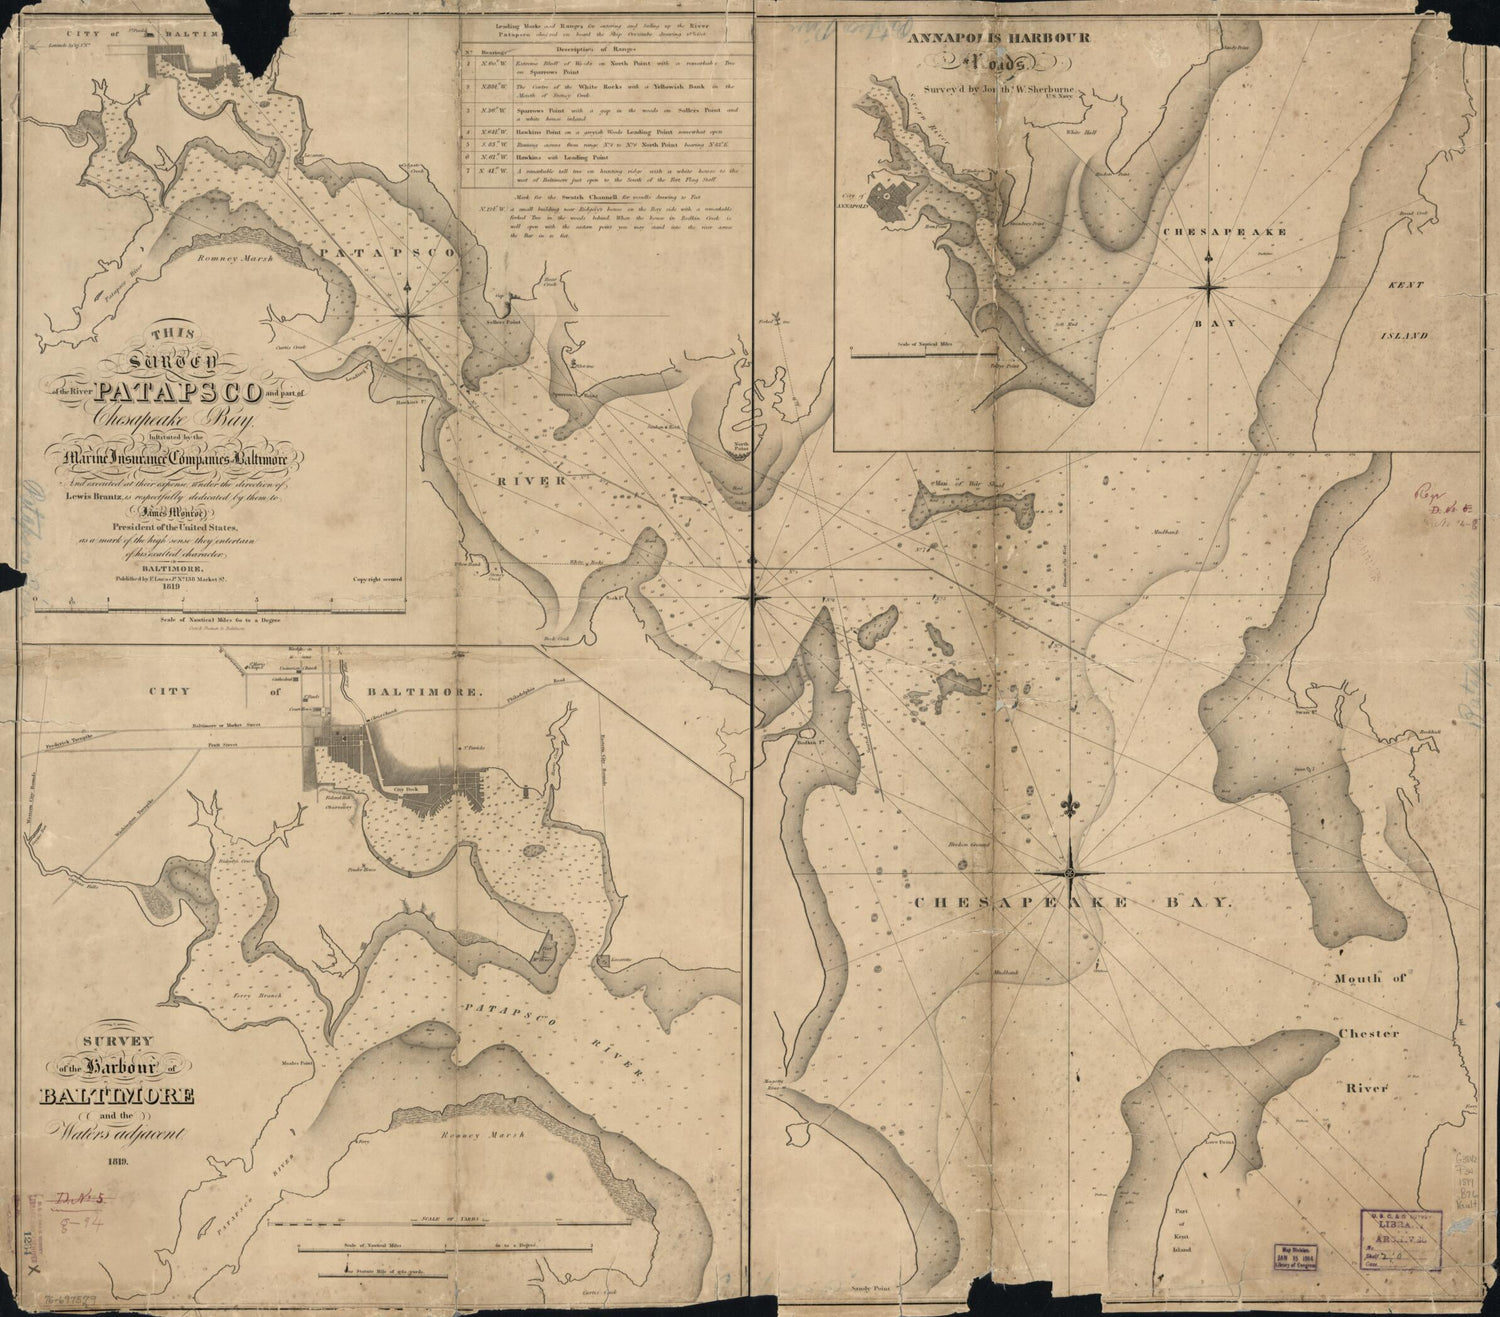 This old map of This Survey of the River Patapsco and Part of Chesapeake Bay from 1819 was created by Lewis Brantz, Fielding Lucas in 1819